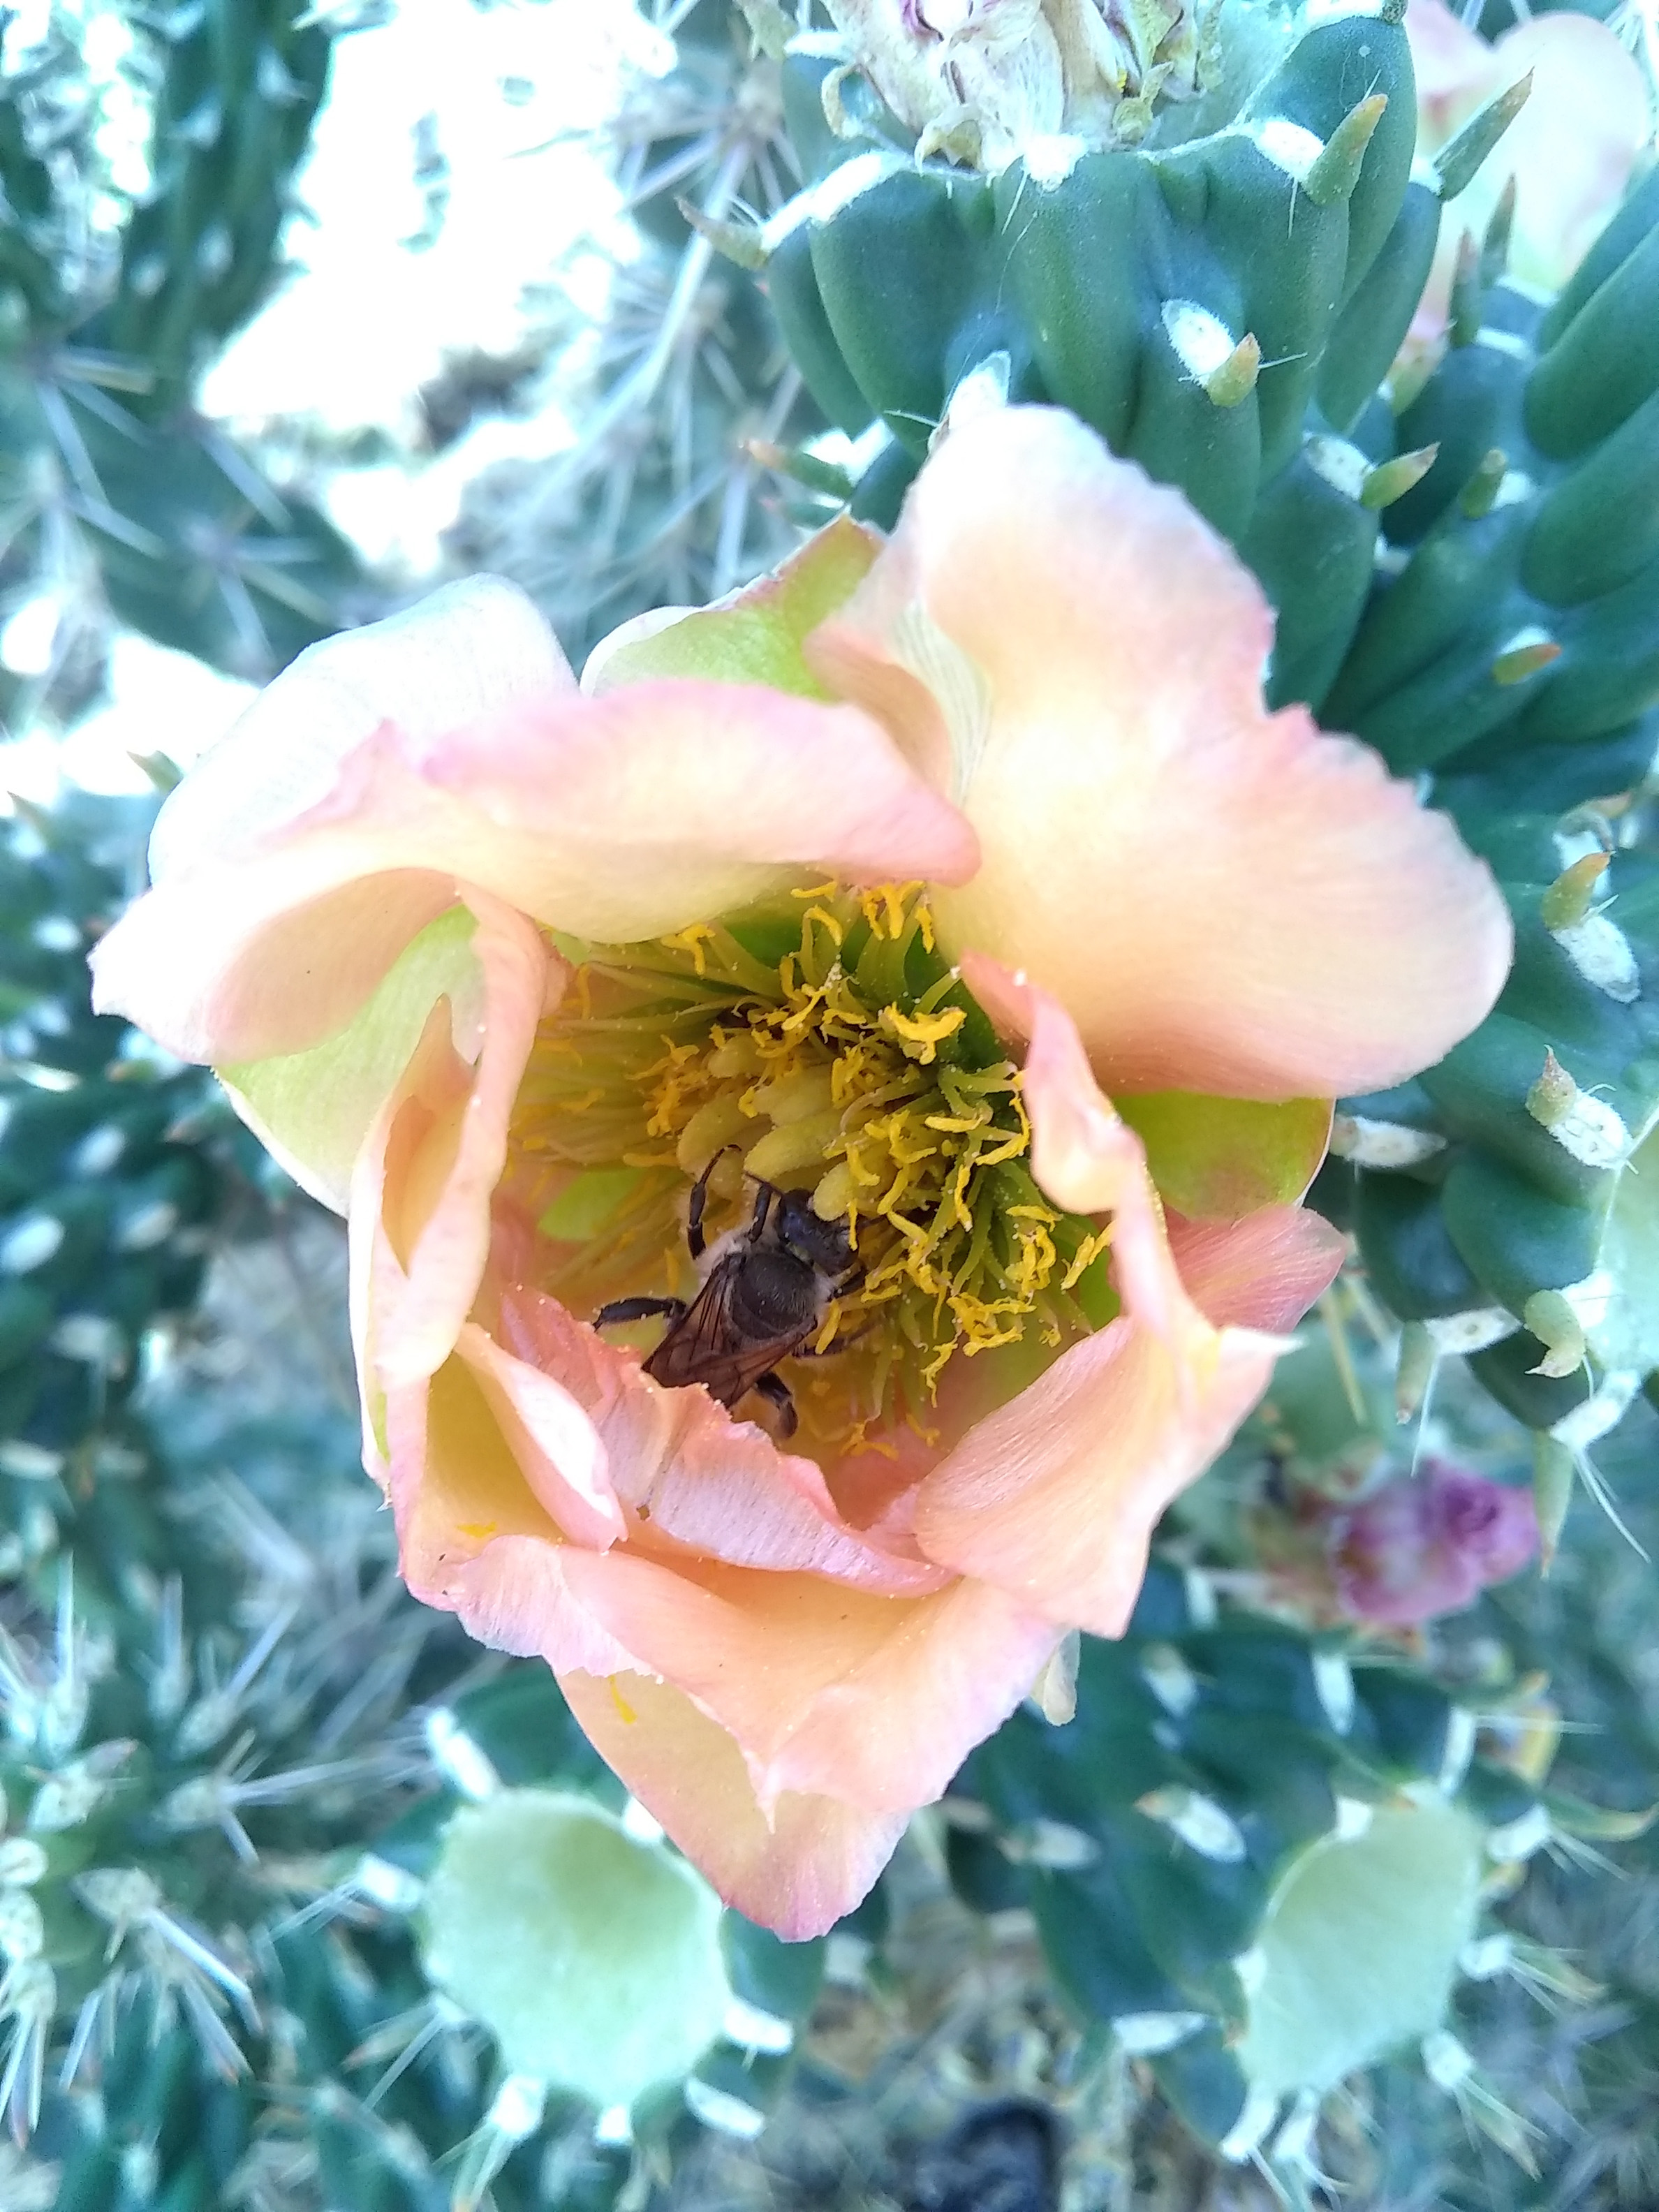 A brown bee forages deep inside the pale pink-yellow flower of a cholla cactus